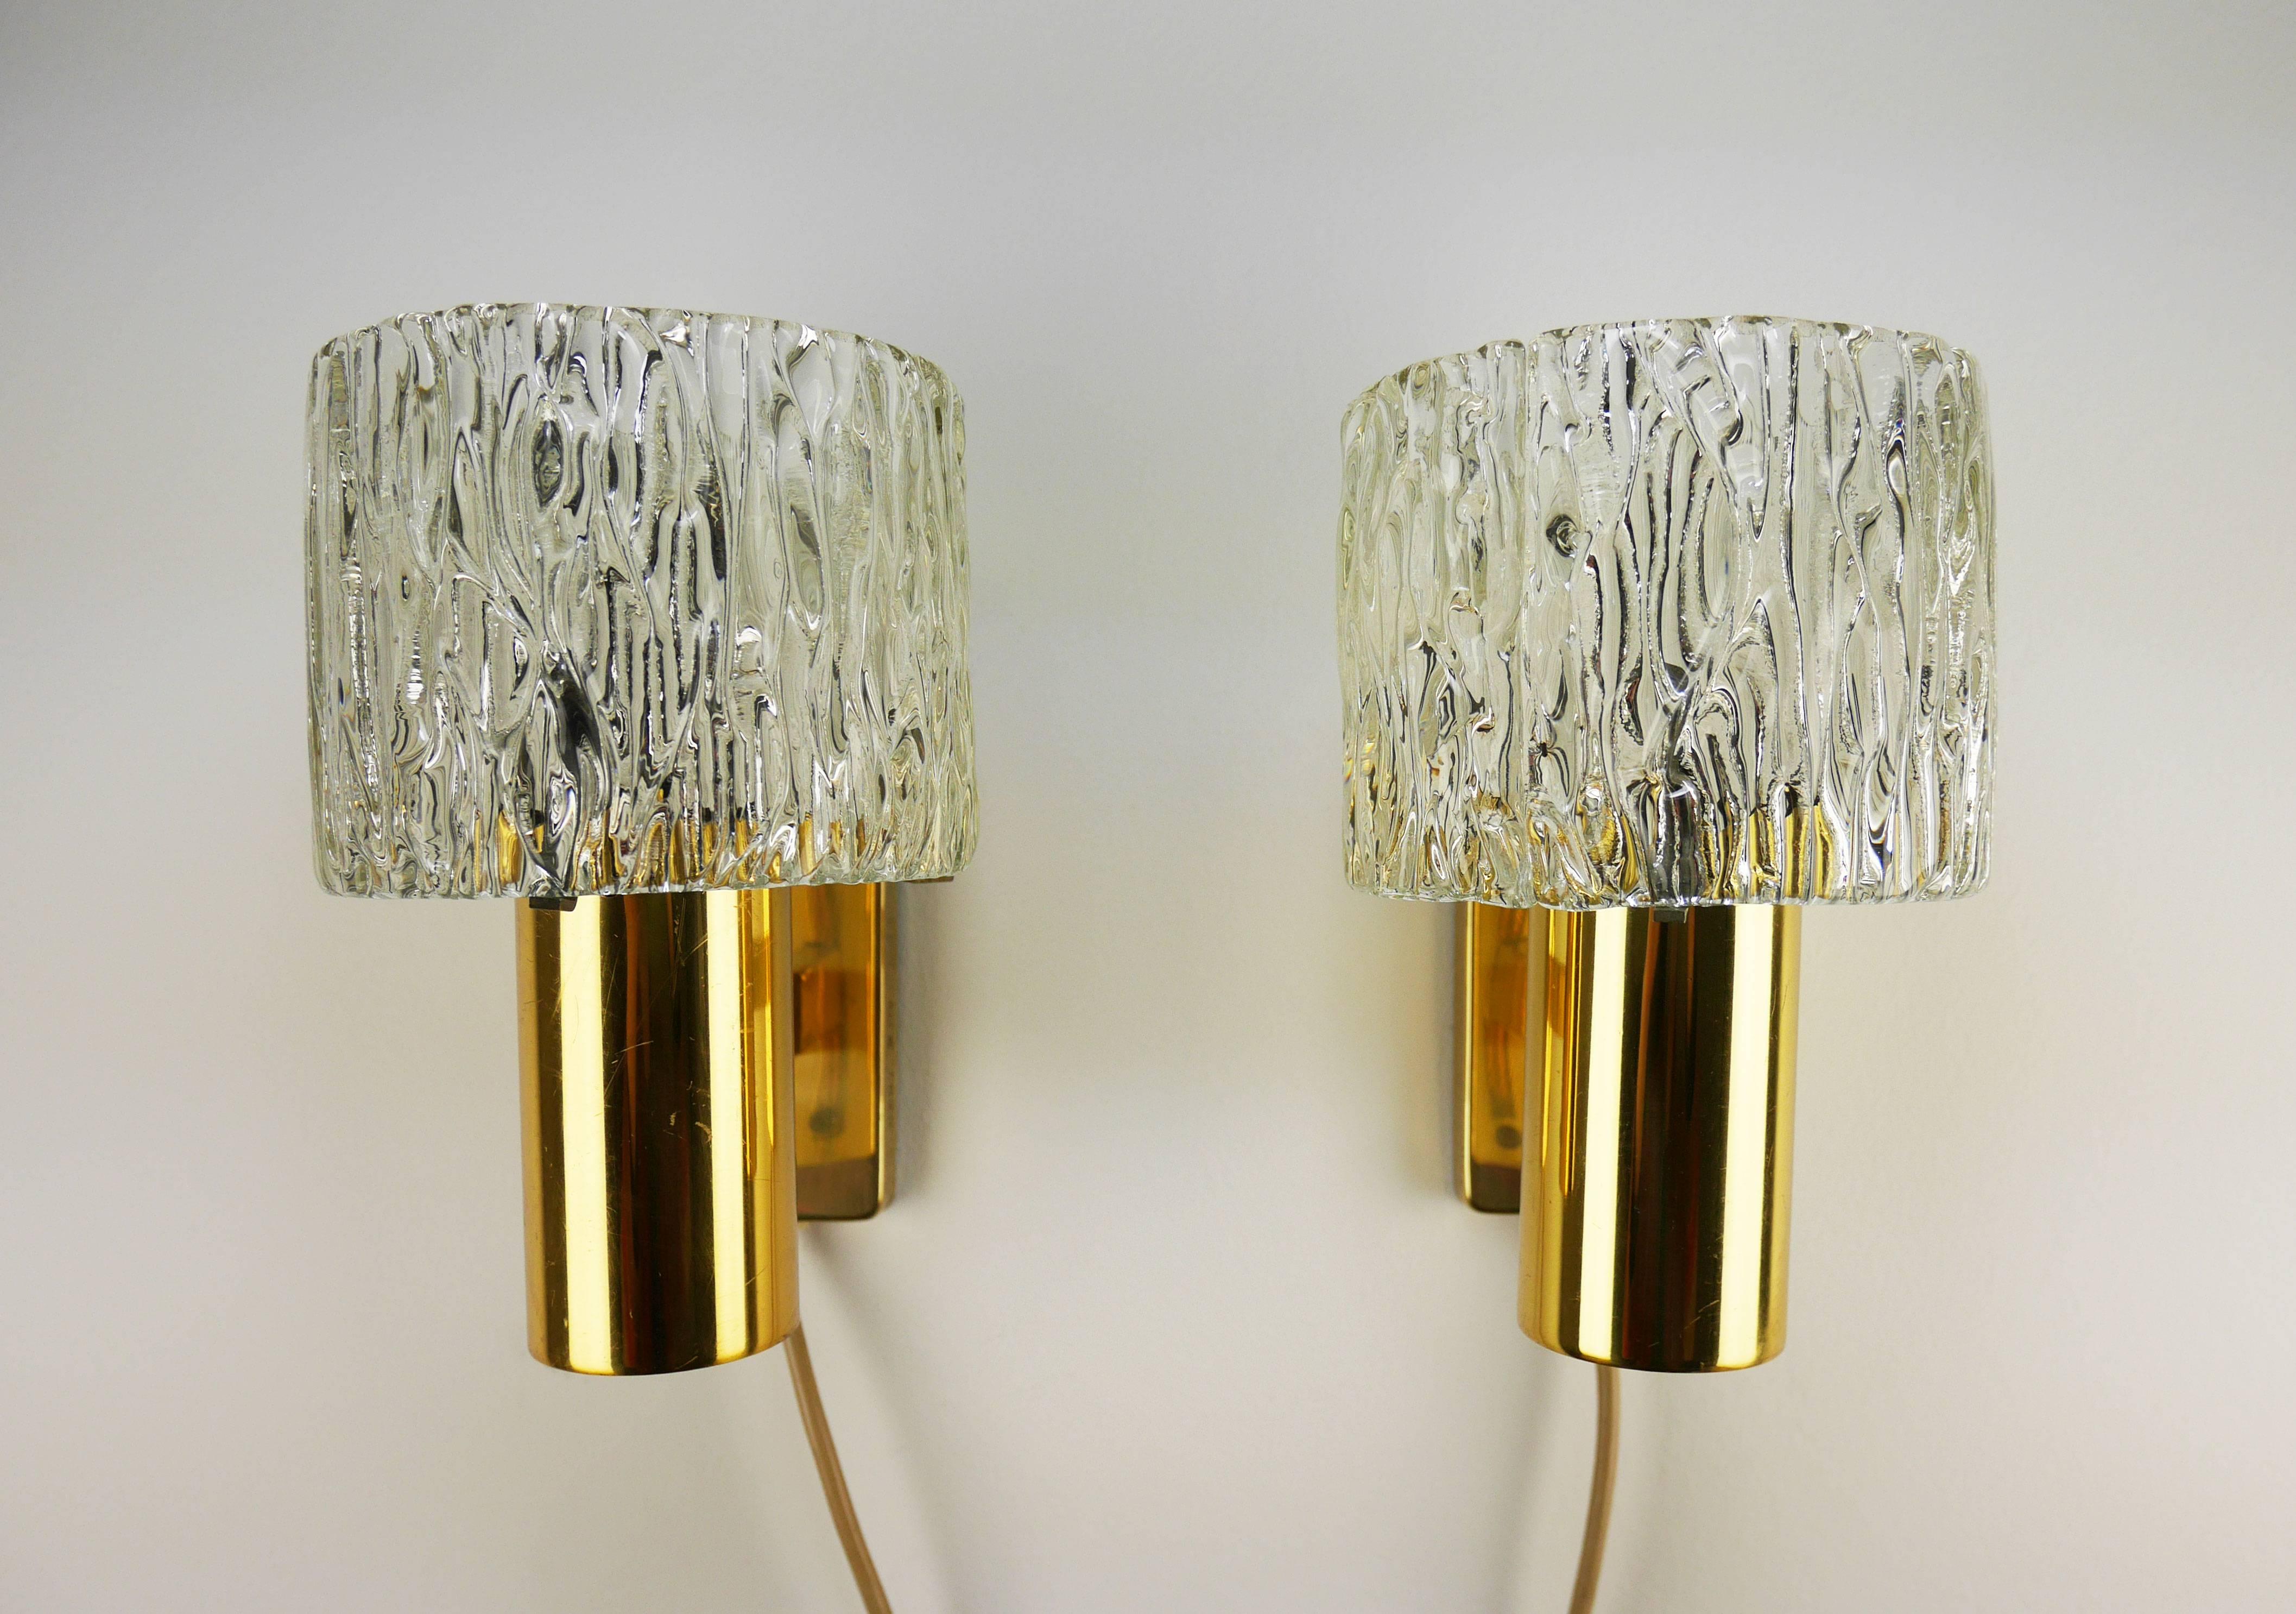 Three elegant pairs of Scandinavian Modern wall lights by Carl Fagerlund for Swedish Orrefors. Thick, textured tubular glass on brass mount. Manufactured in Sweden in the late 1950s. Model 8397. Some items are marked on one side. Items are in